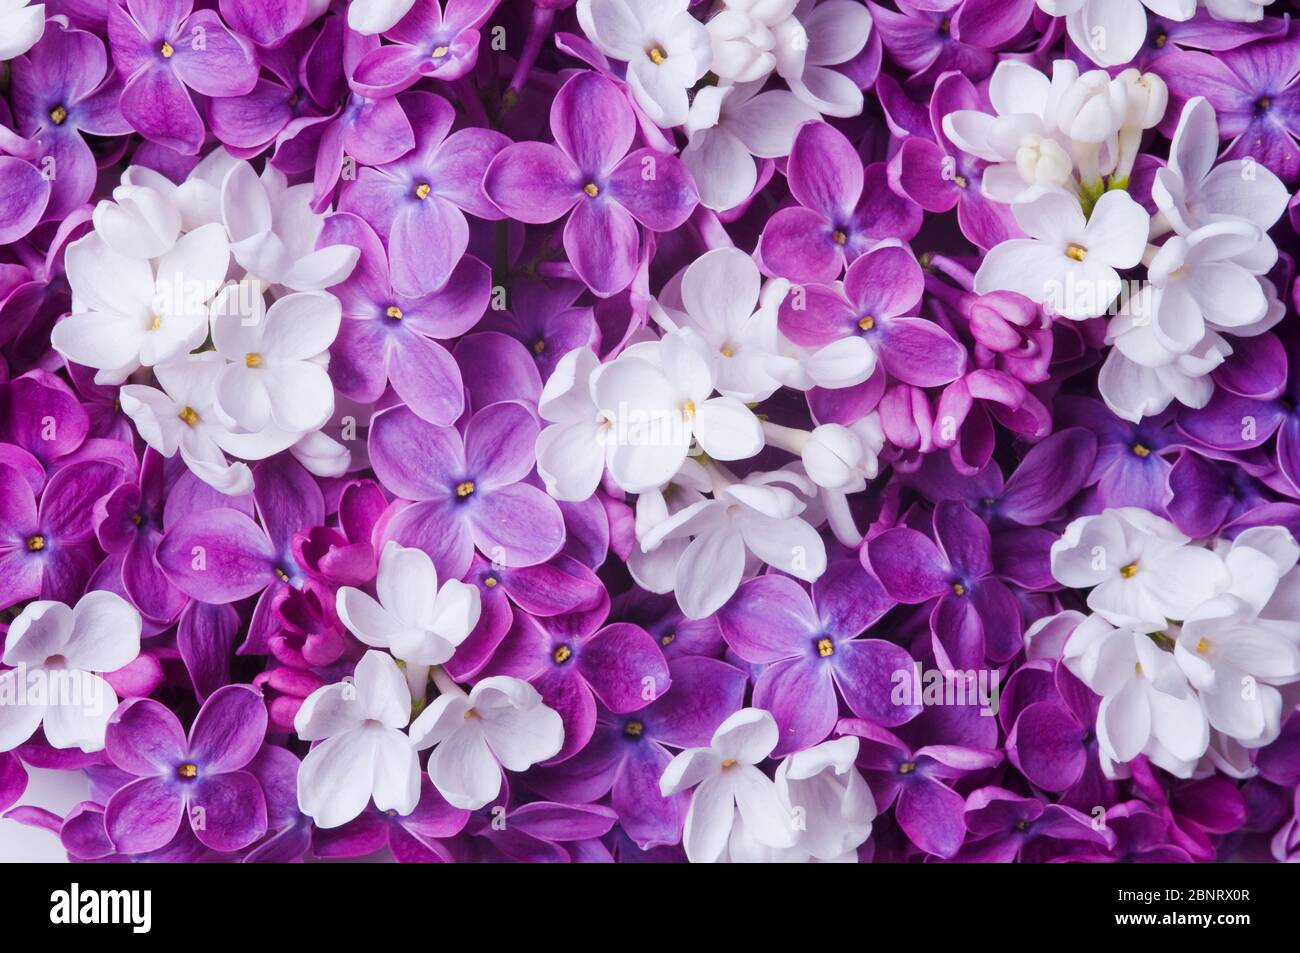 Purple Lilac Flowers As Background Stock Photo  Image of natural season  218995640